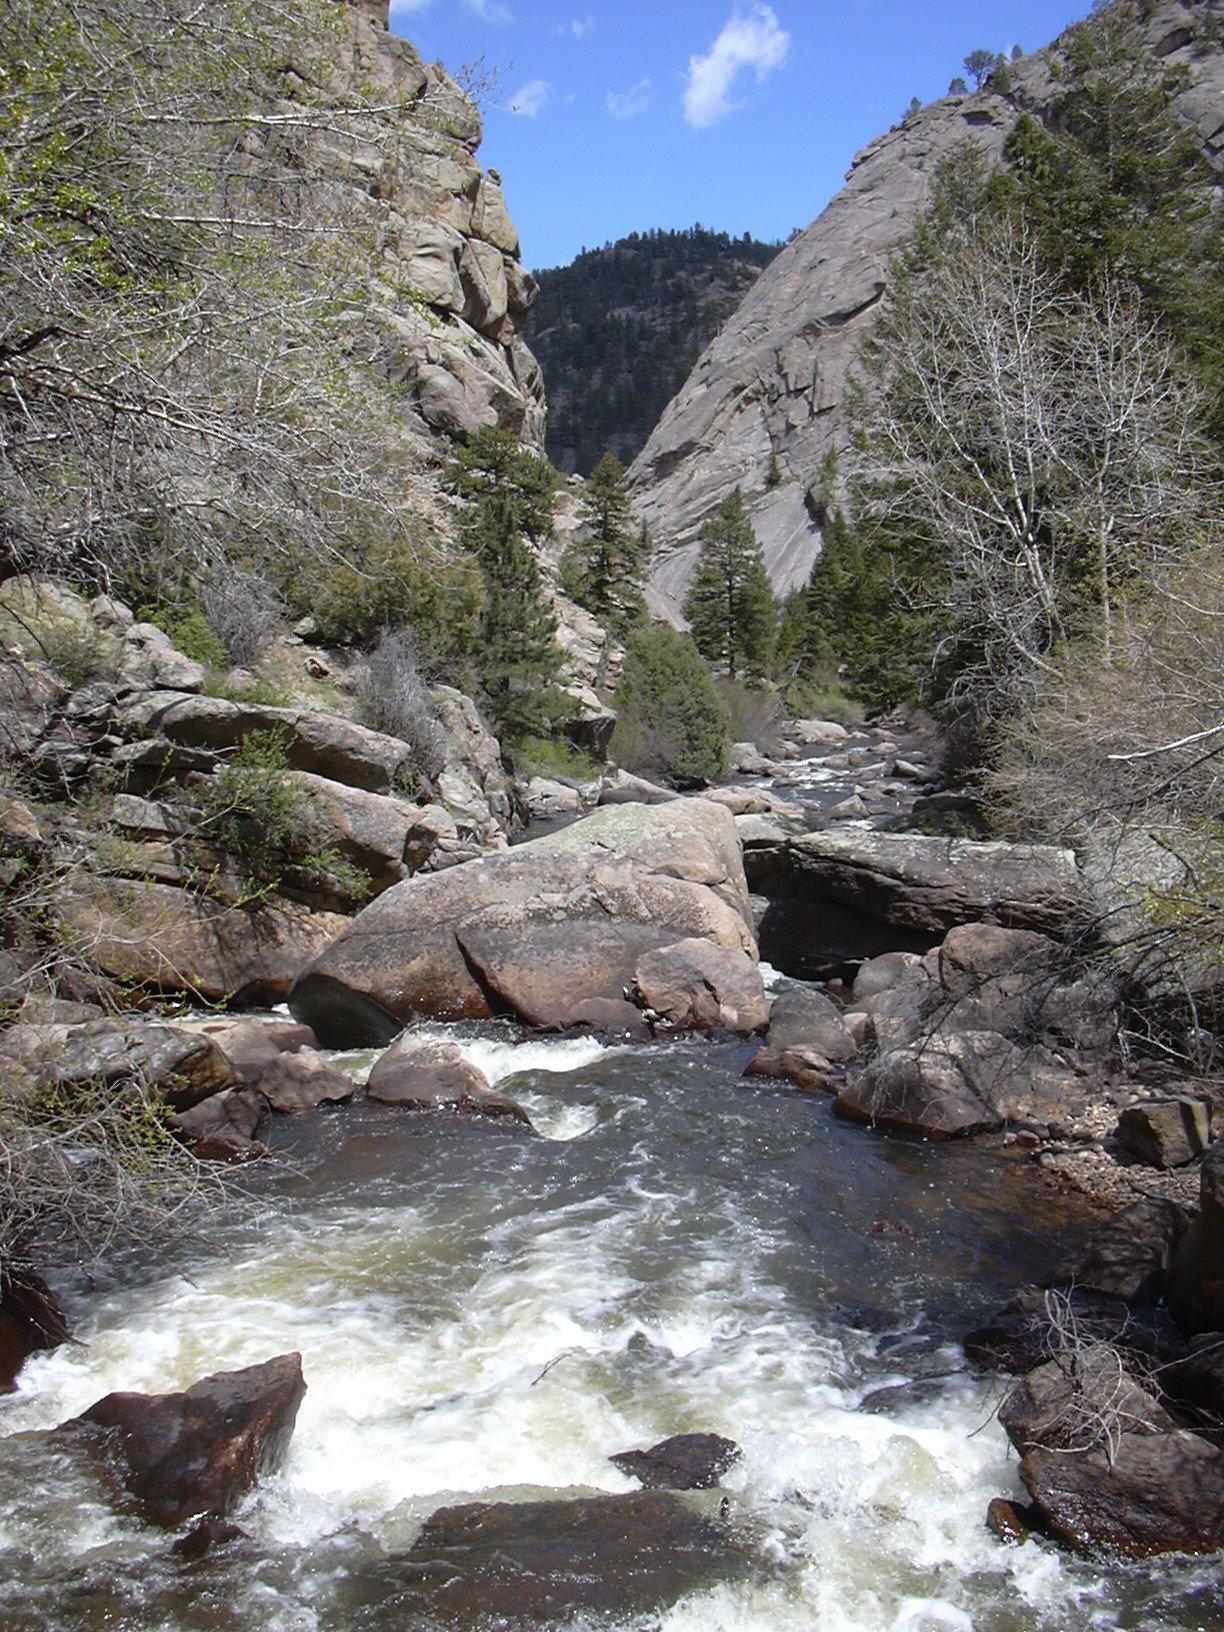 Saint Vrain Creek and Canyon, looking east, 05/17/08